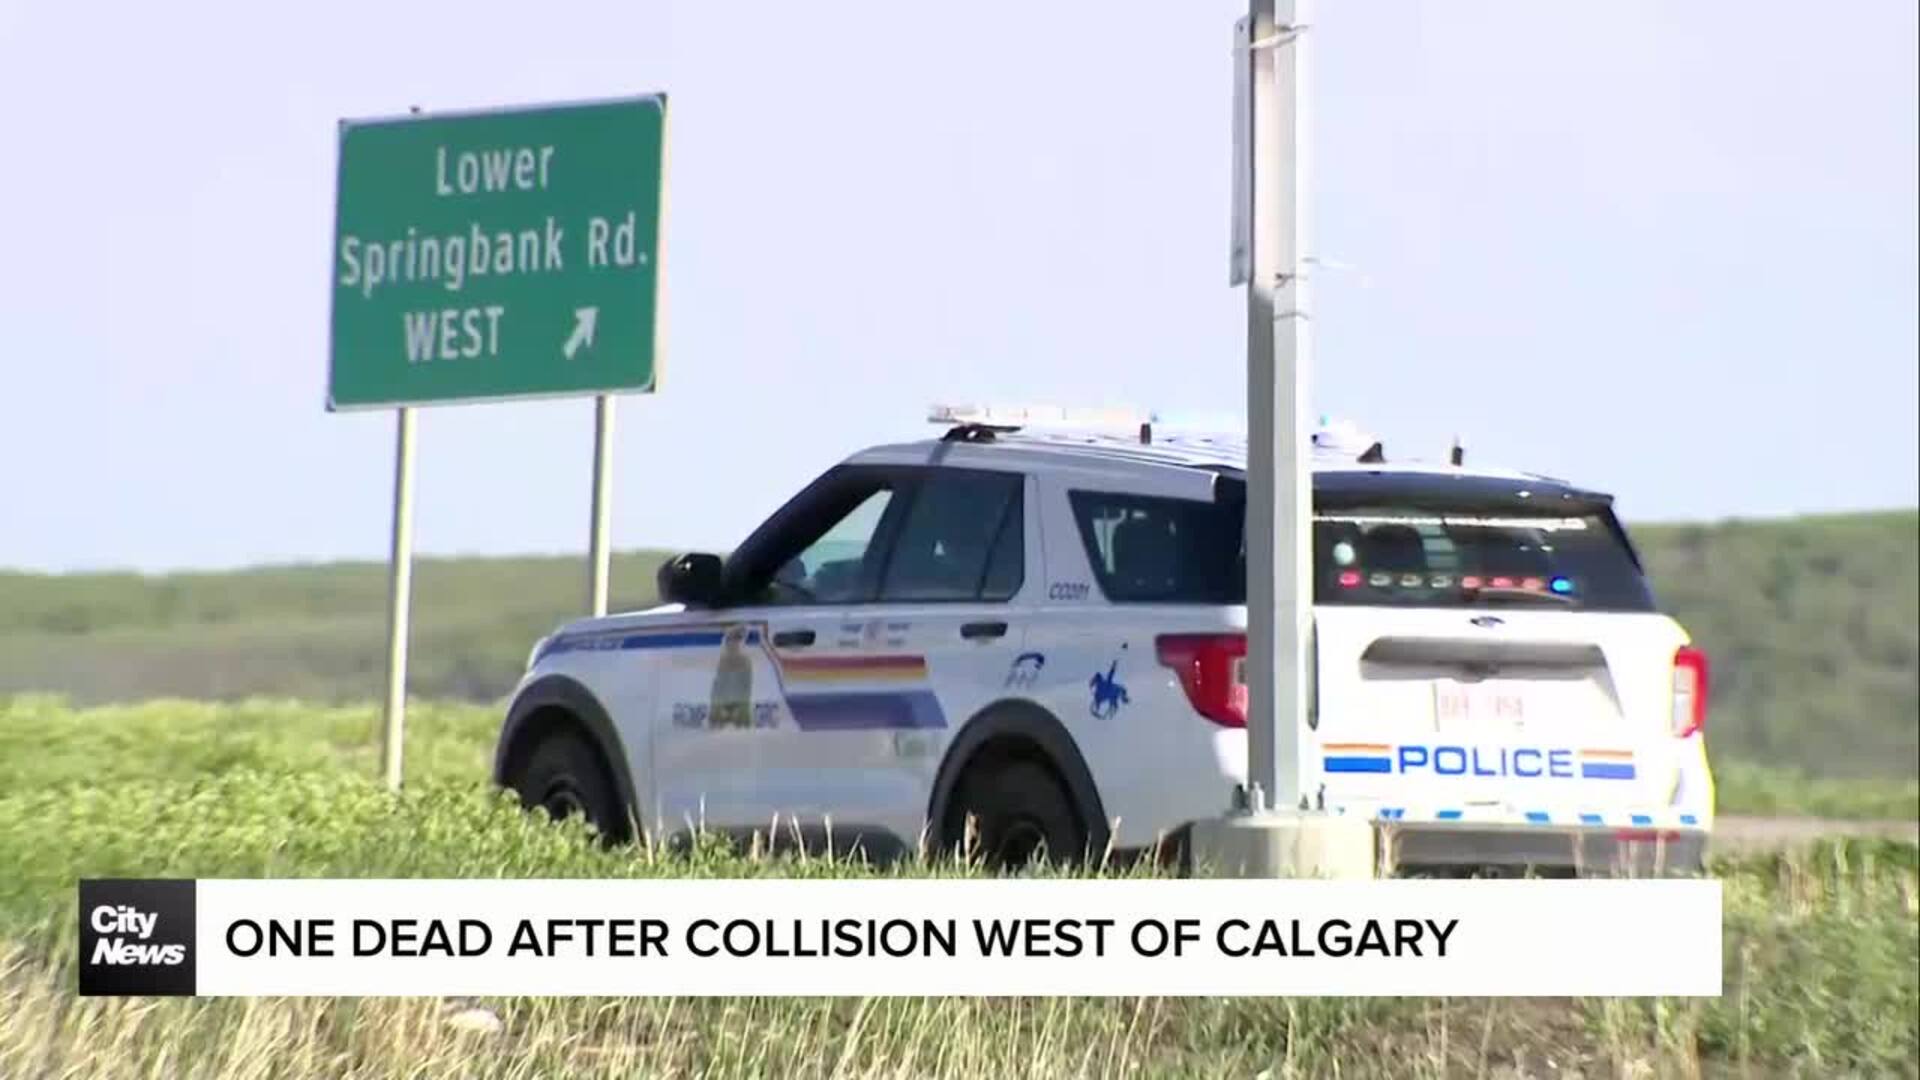 One dead after collision west of Calgary